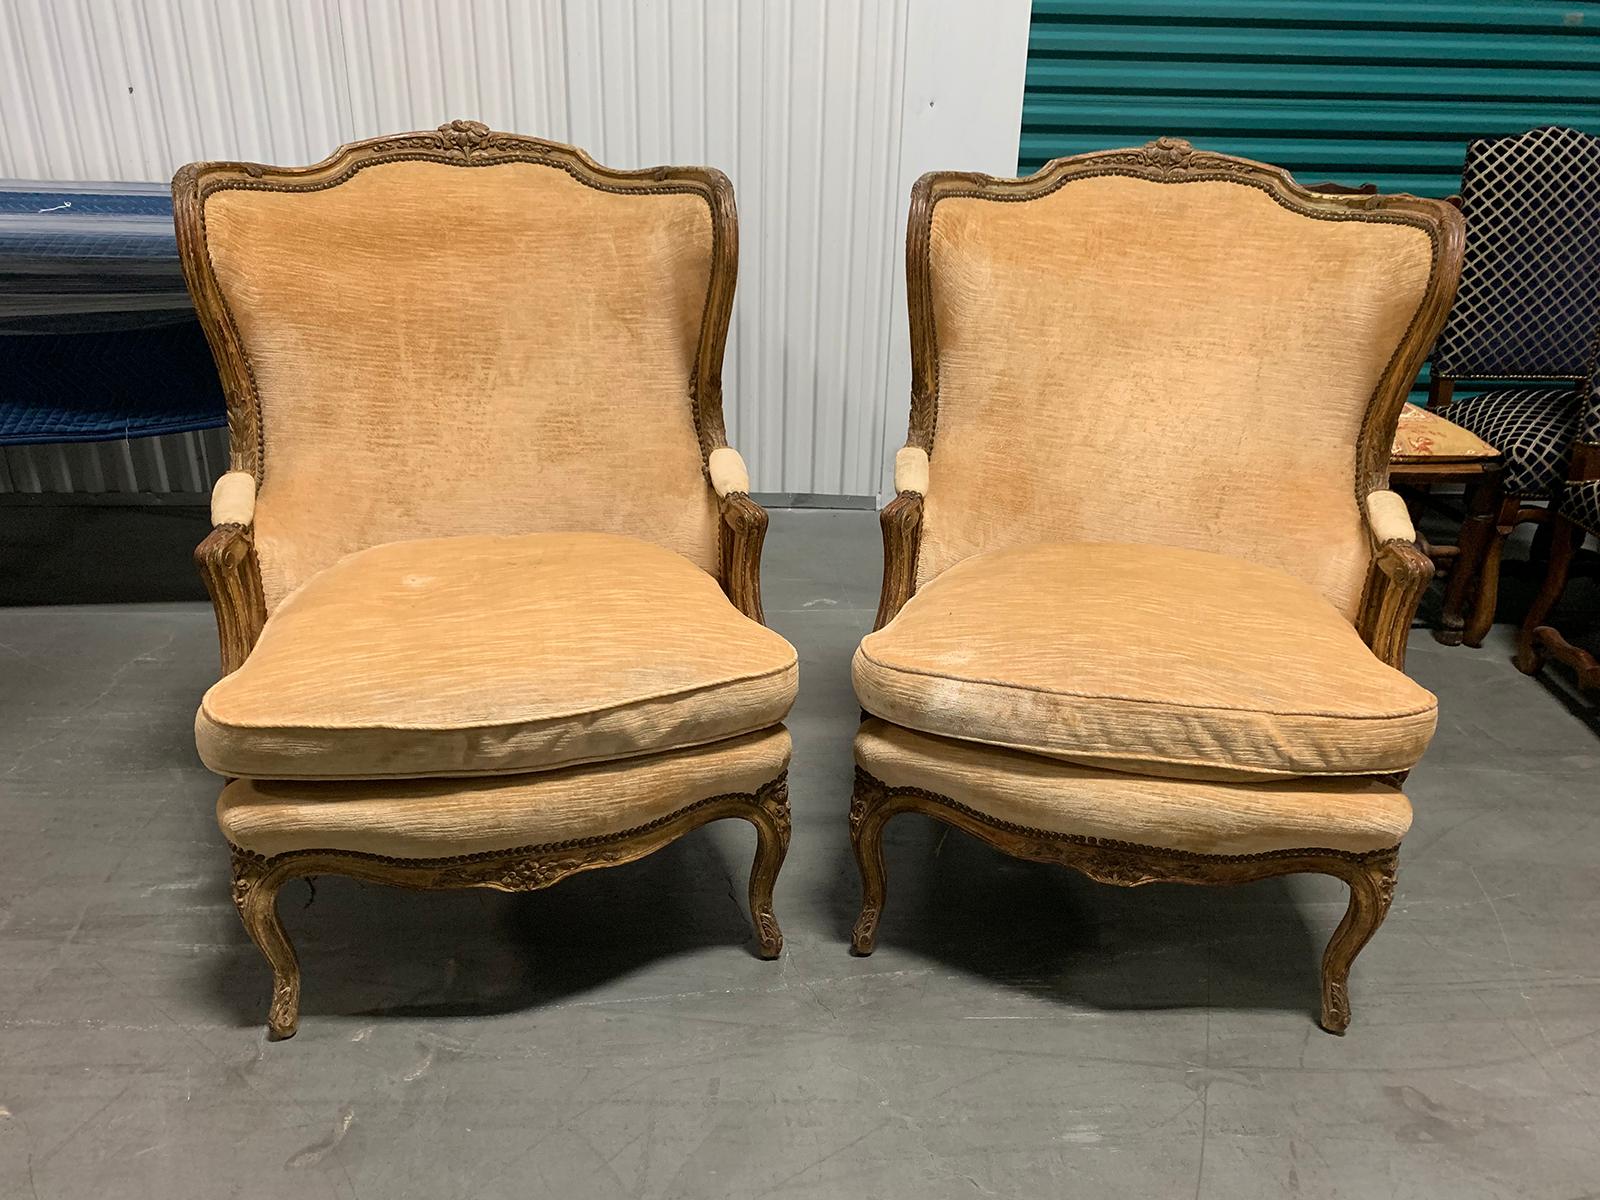 Pair of 19th century large French upholstered bergere oreilles armchairs, polychrome finish
Measures: 29